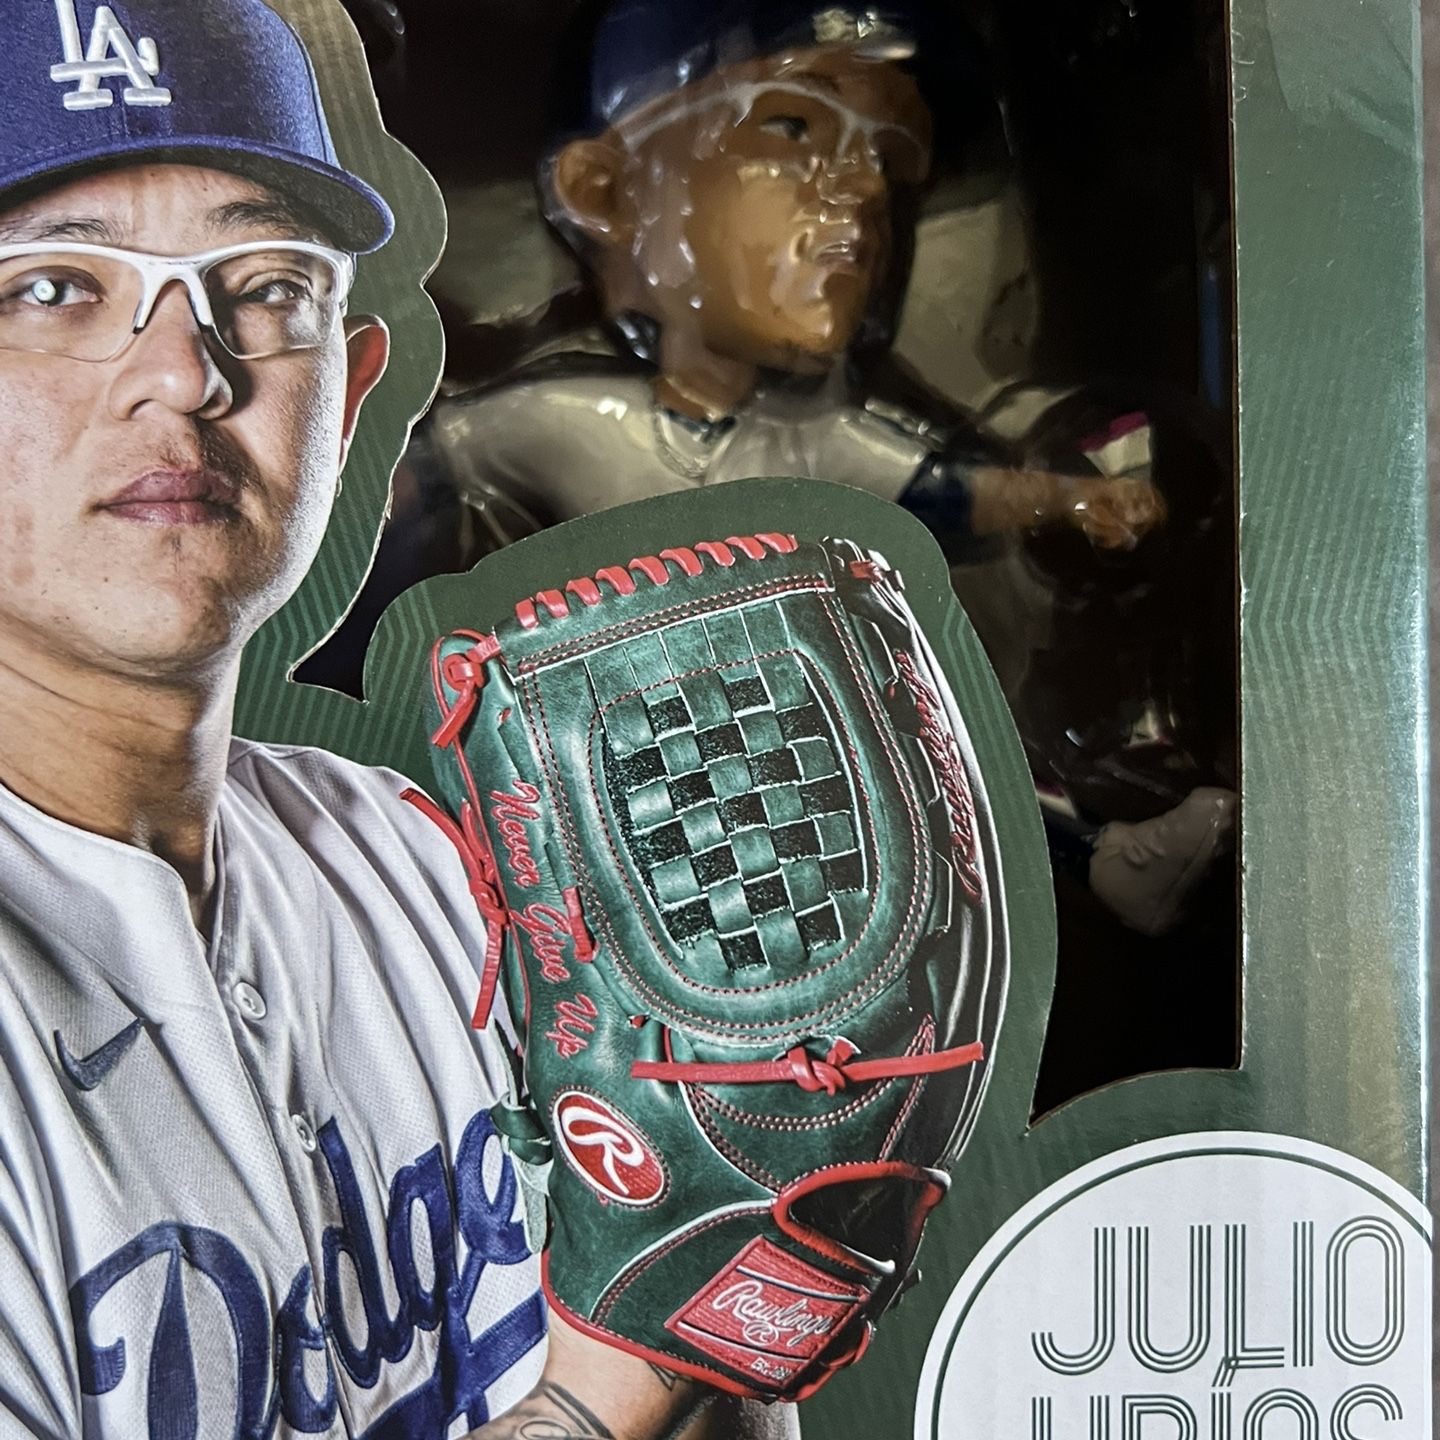 Dodgers vs Nationals Tickets On 5/30. FREE JULIO URIAS JERSEY! AISLE SEATS!  for Sale in Carson, CA - OfferUp